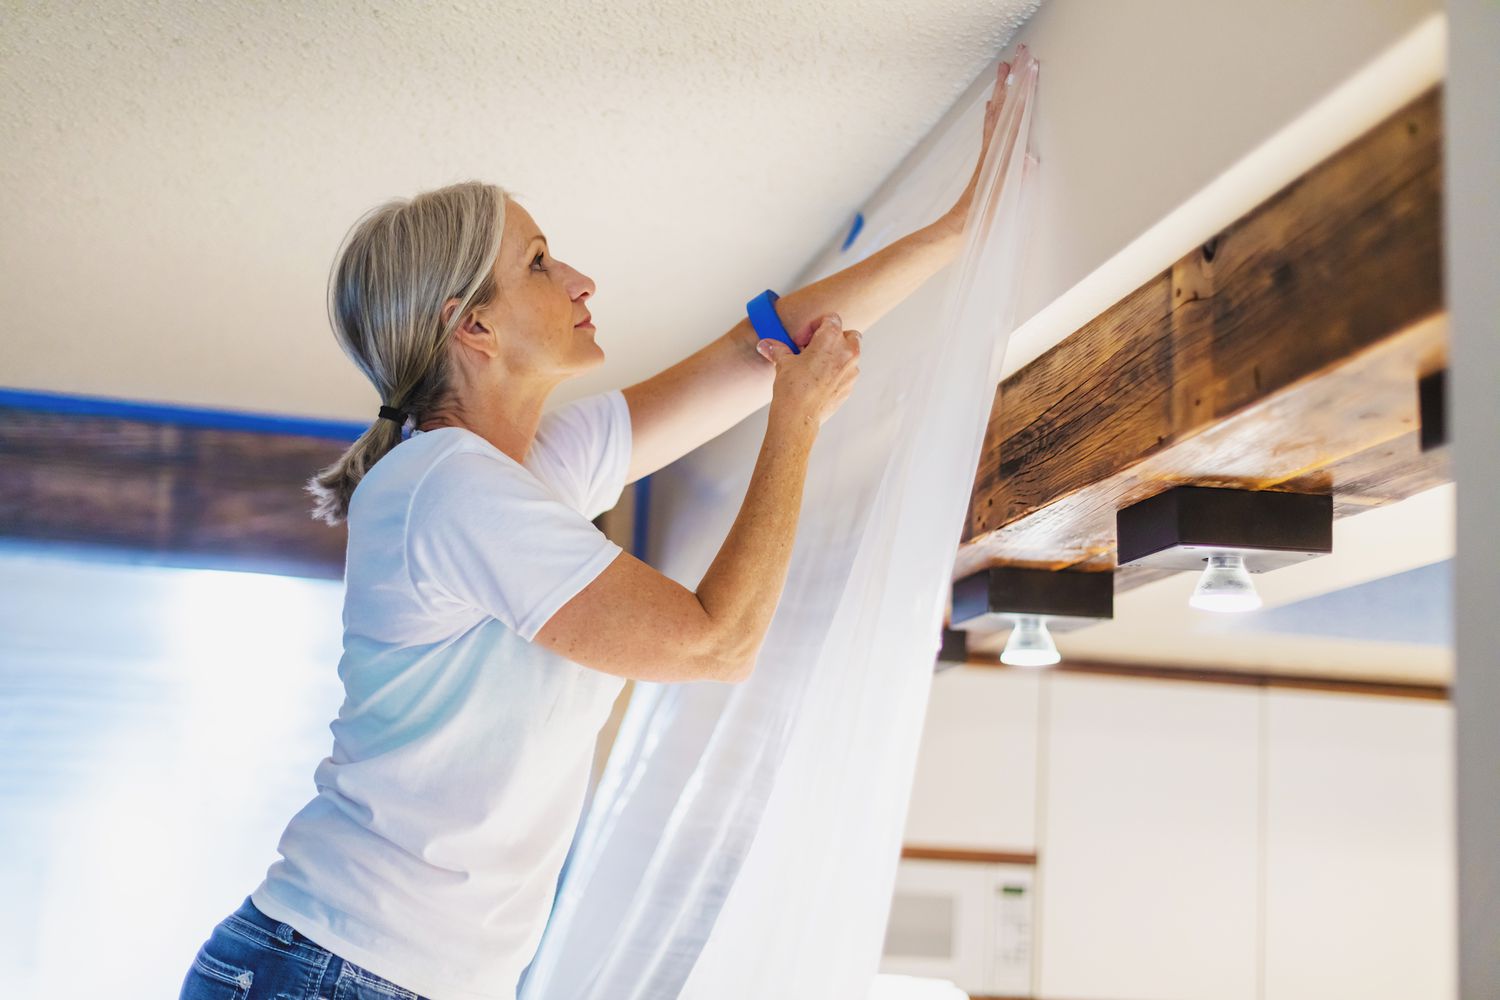 What Do You Paint First: Ceiling Or Walls?